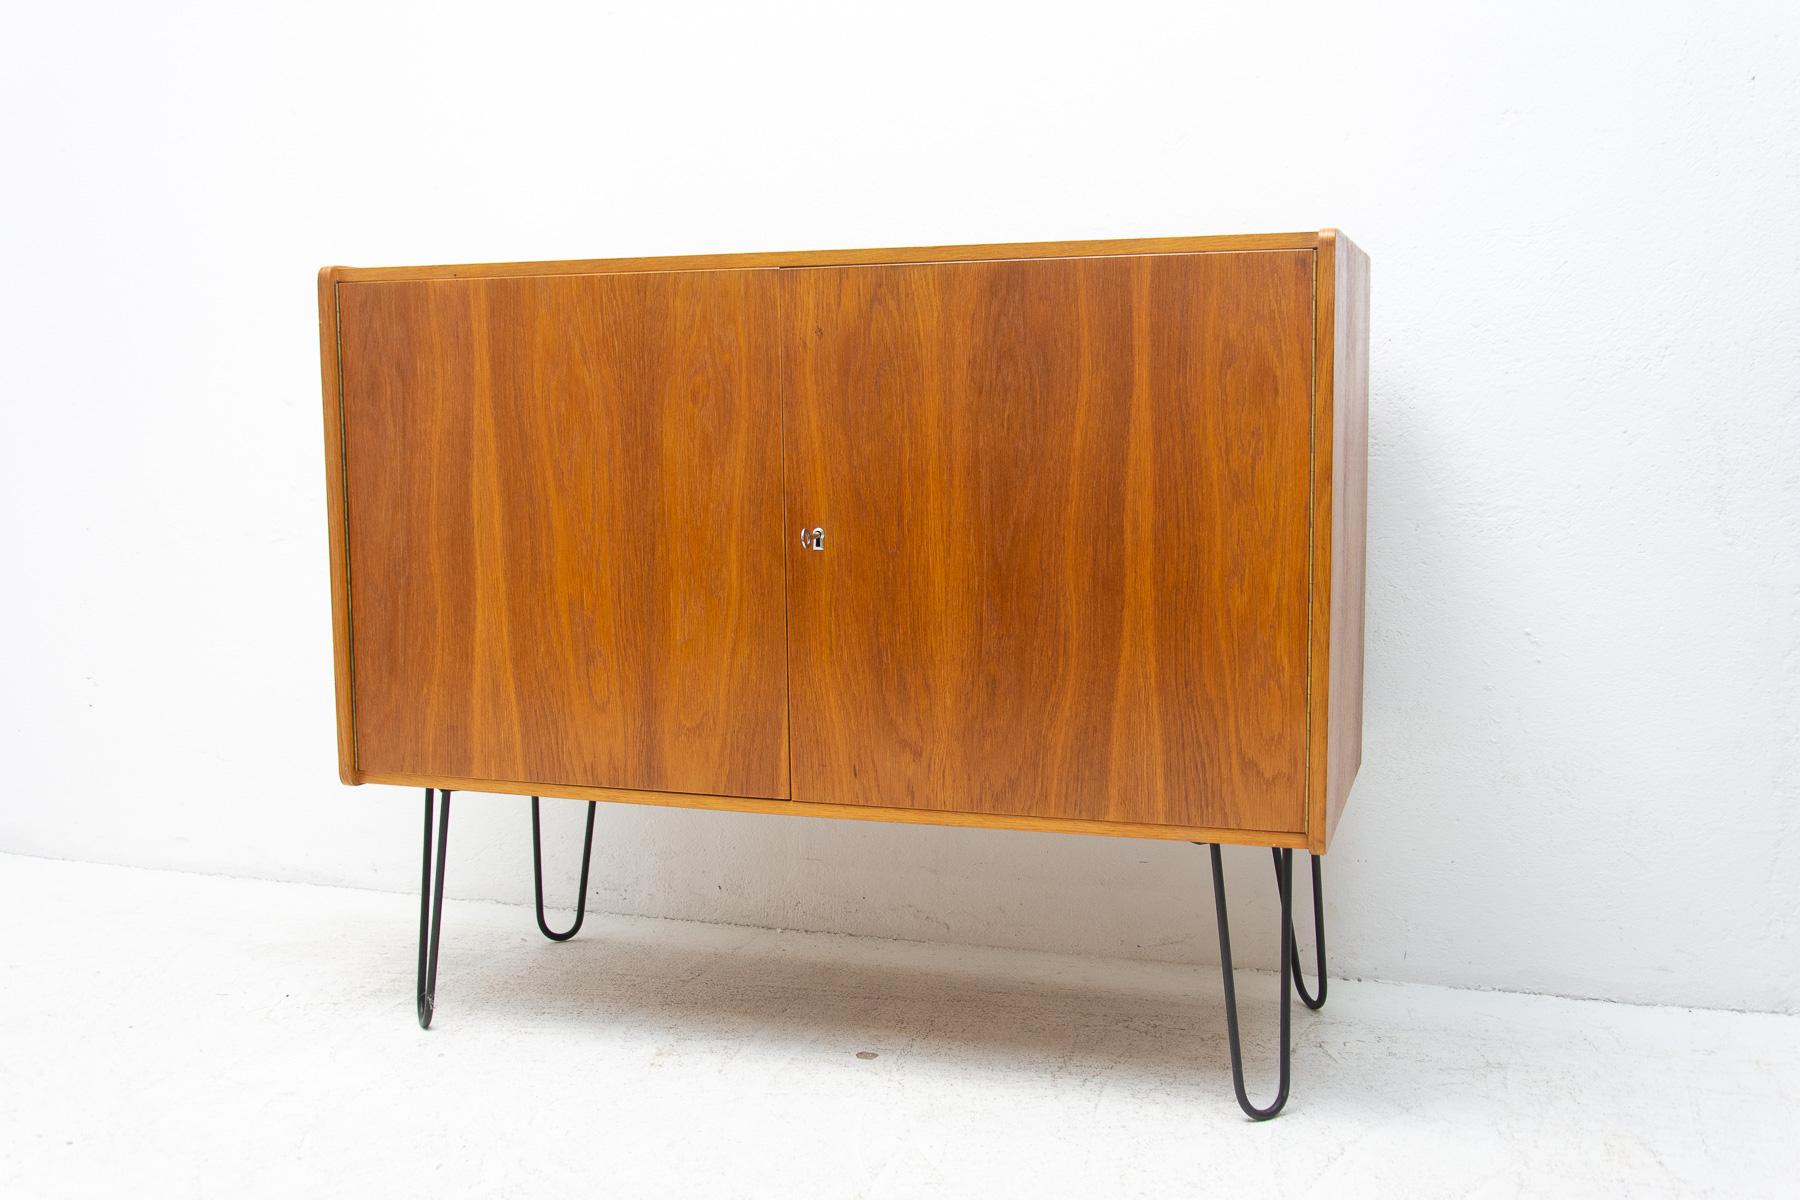 This upcycled mid-century sideboard-cabinet, catalogue No. U-450 was designed by Jiri Jiroutek for Interiér Praha. It´s made of beechwood, veneer, plywood and iron. Originally made with wooden legs, iron legs were used for this piece to increase